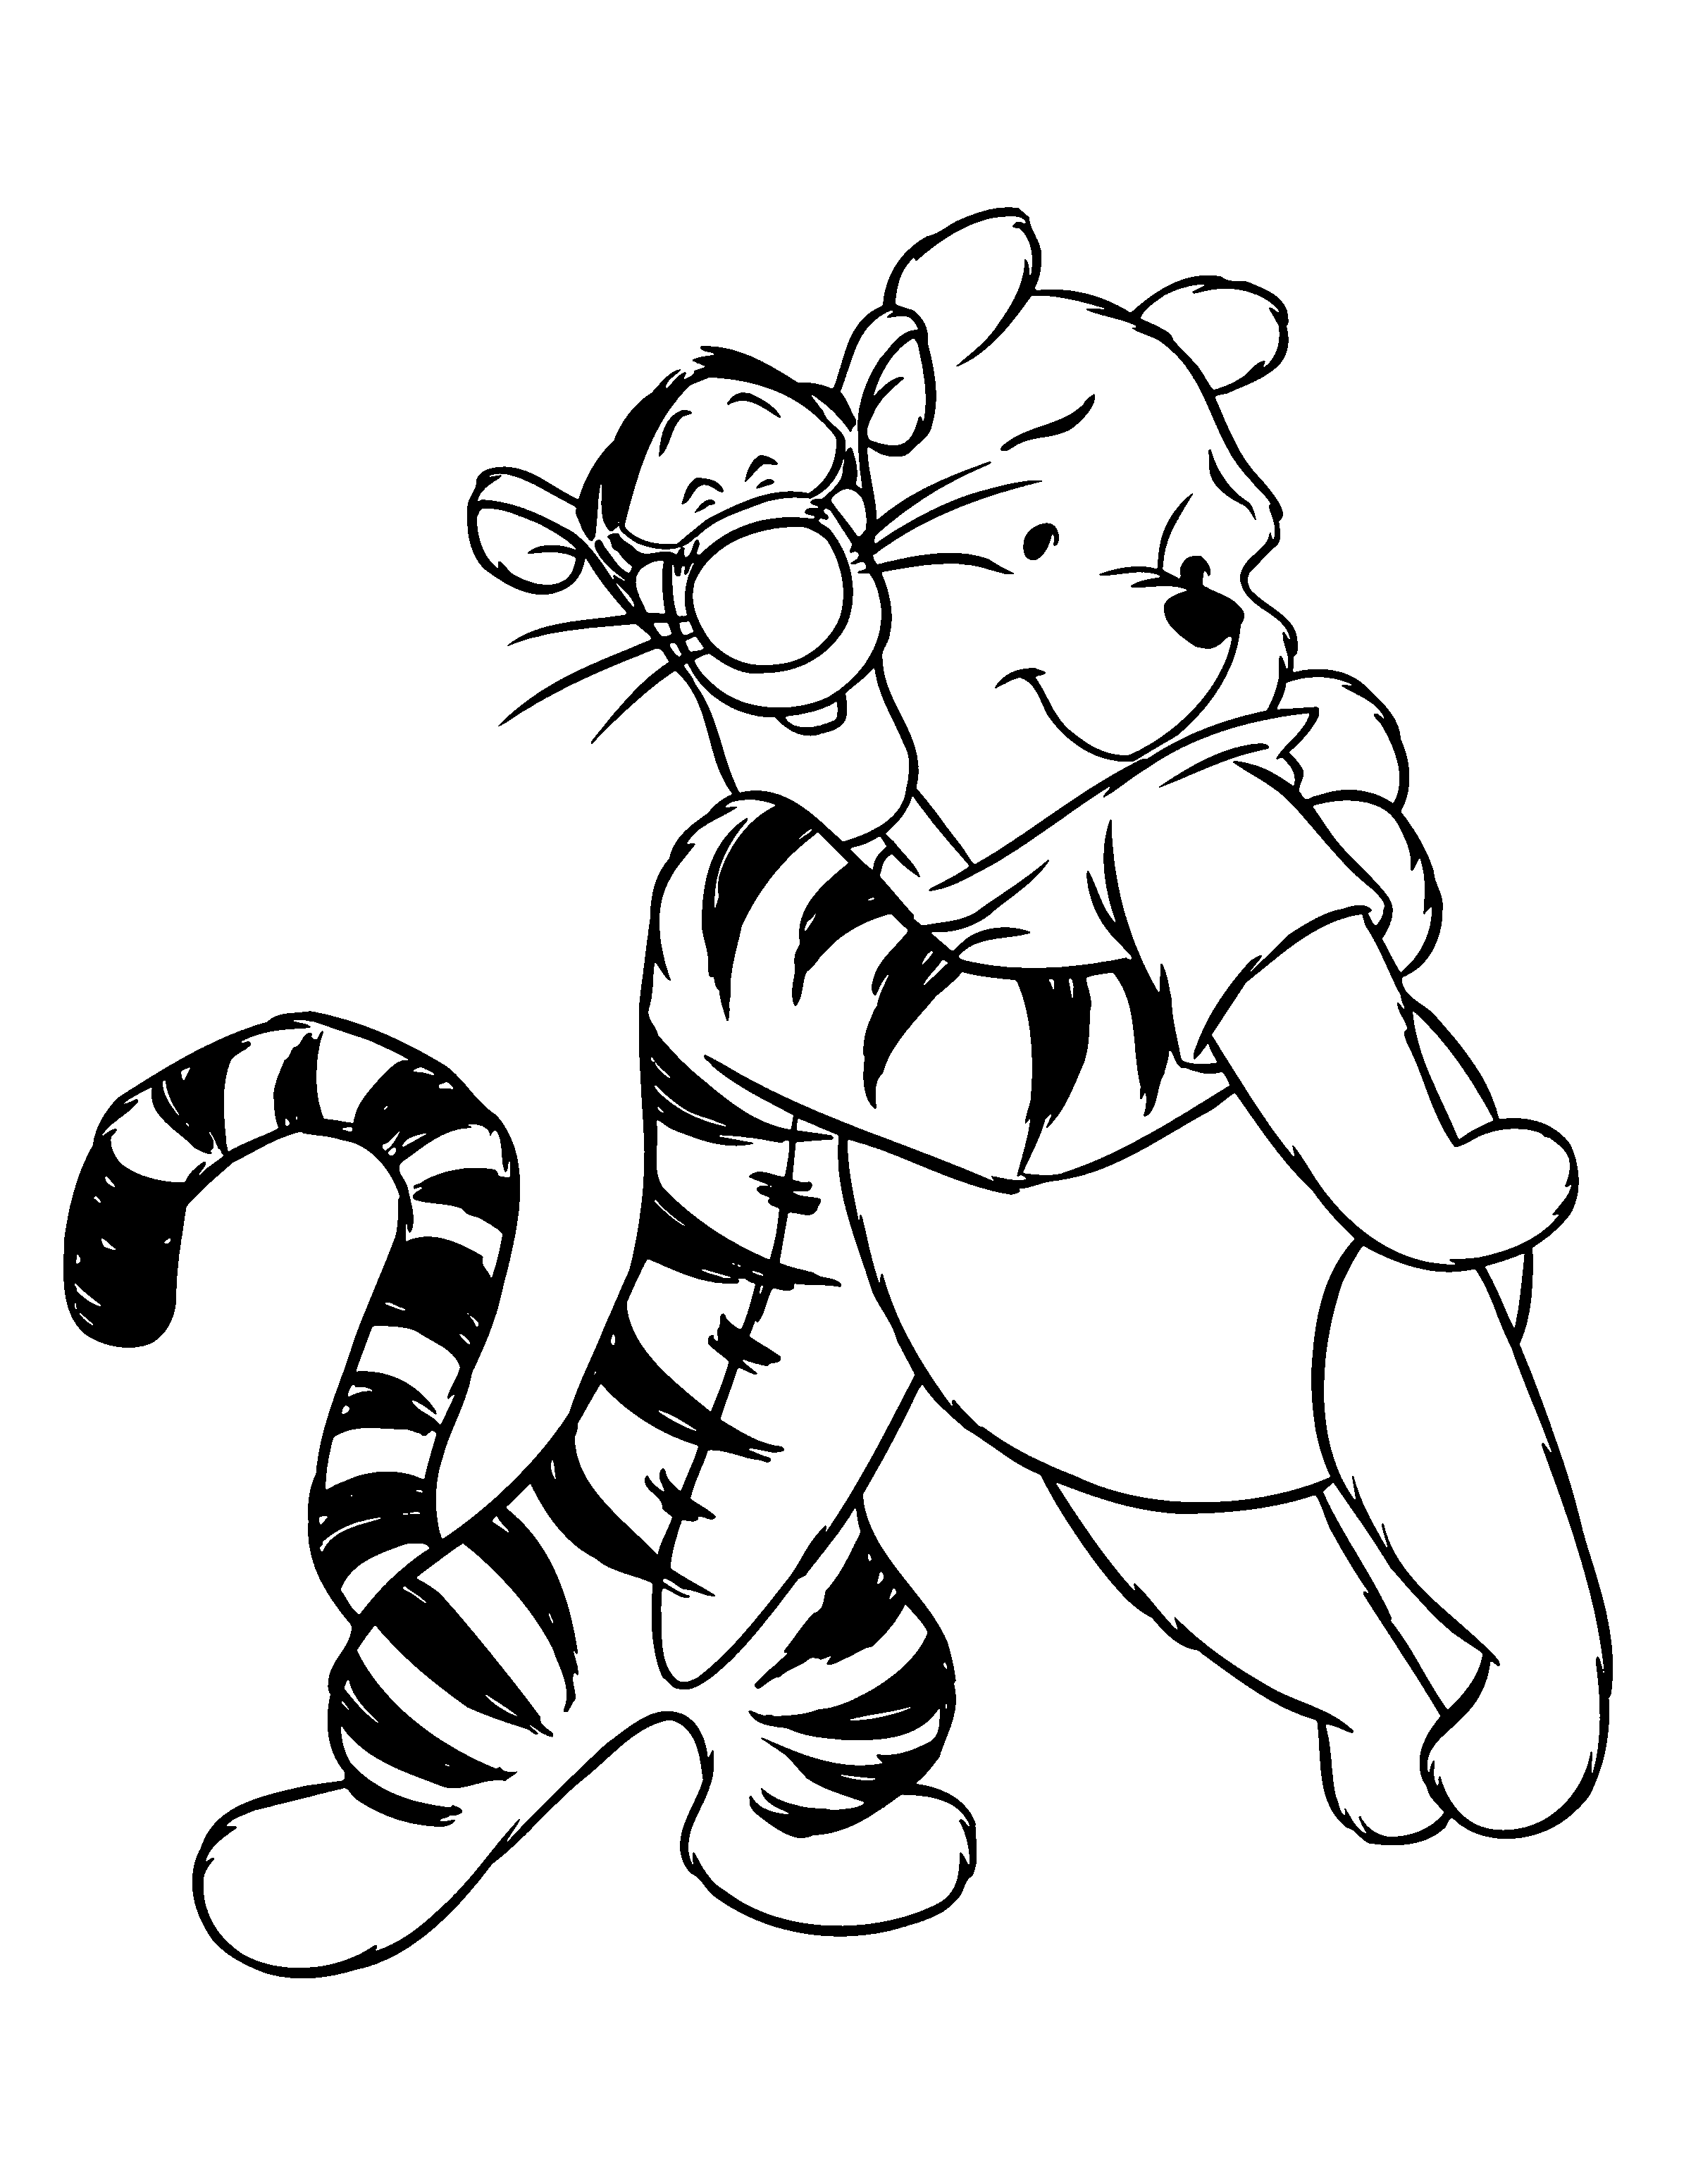 Classic Winnie The Pooh Coloring Pages - Winnie The Pooh And Tigger Coloring Page - HD Wallpaper 